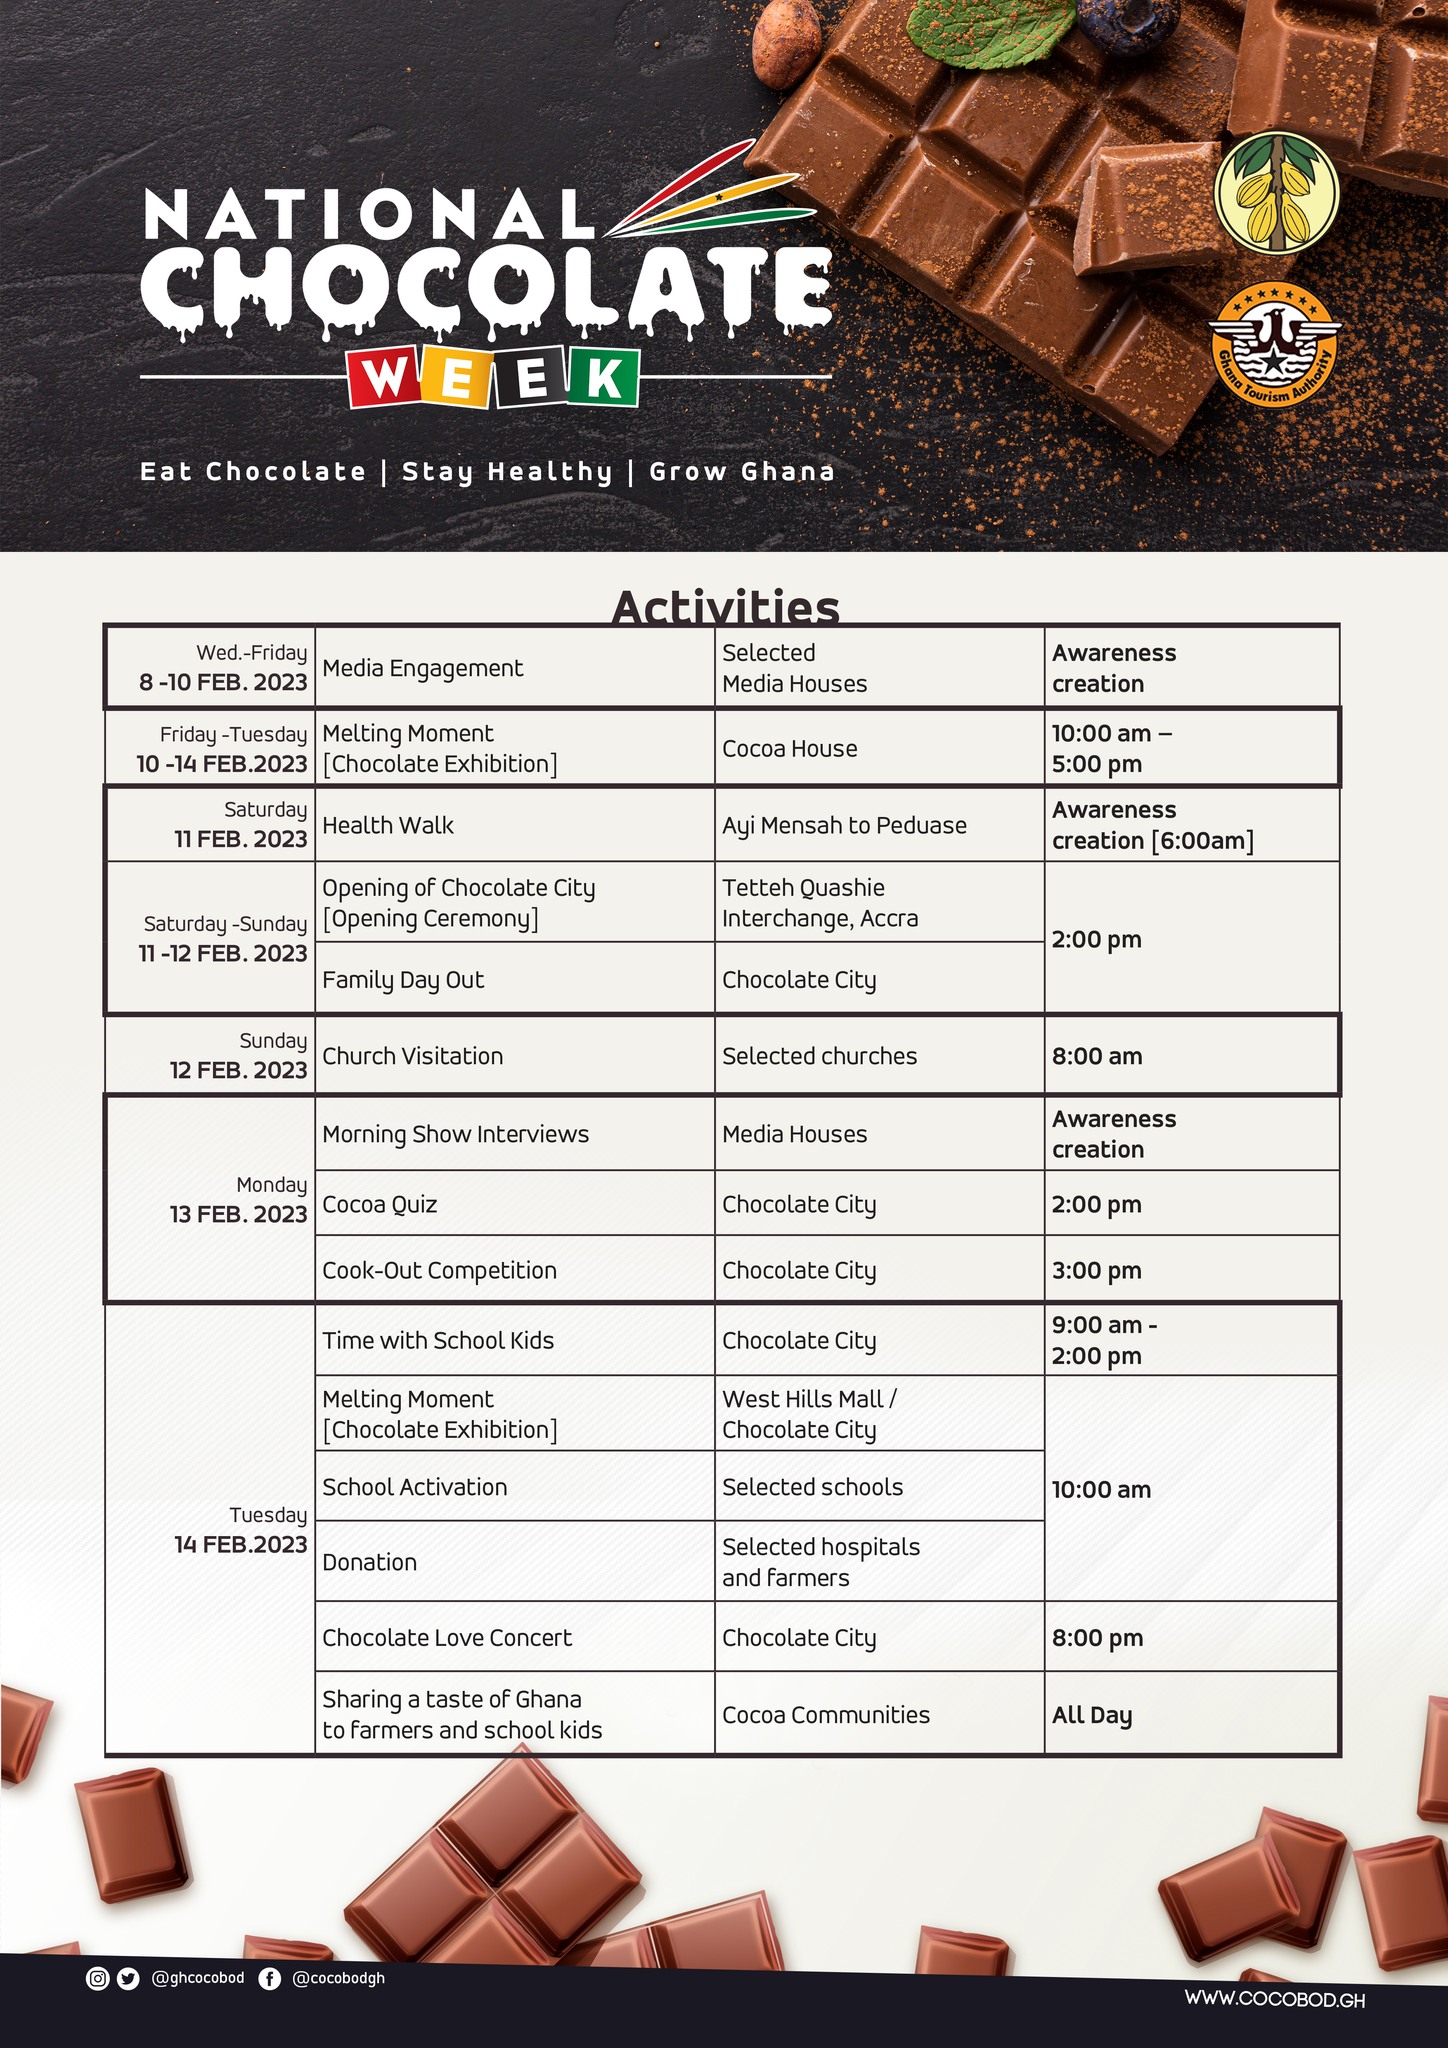 Activities for National Chocolate Week